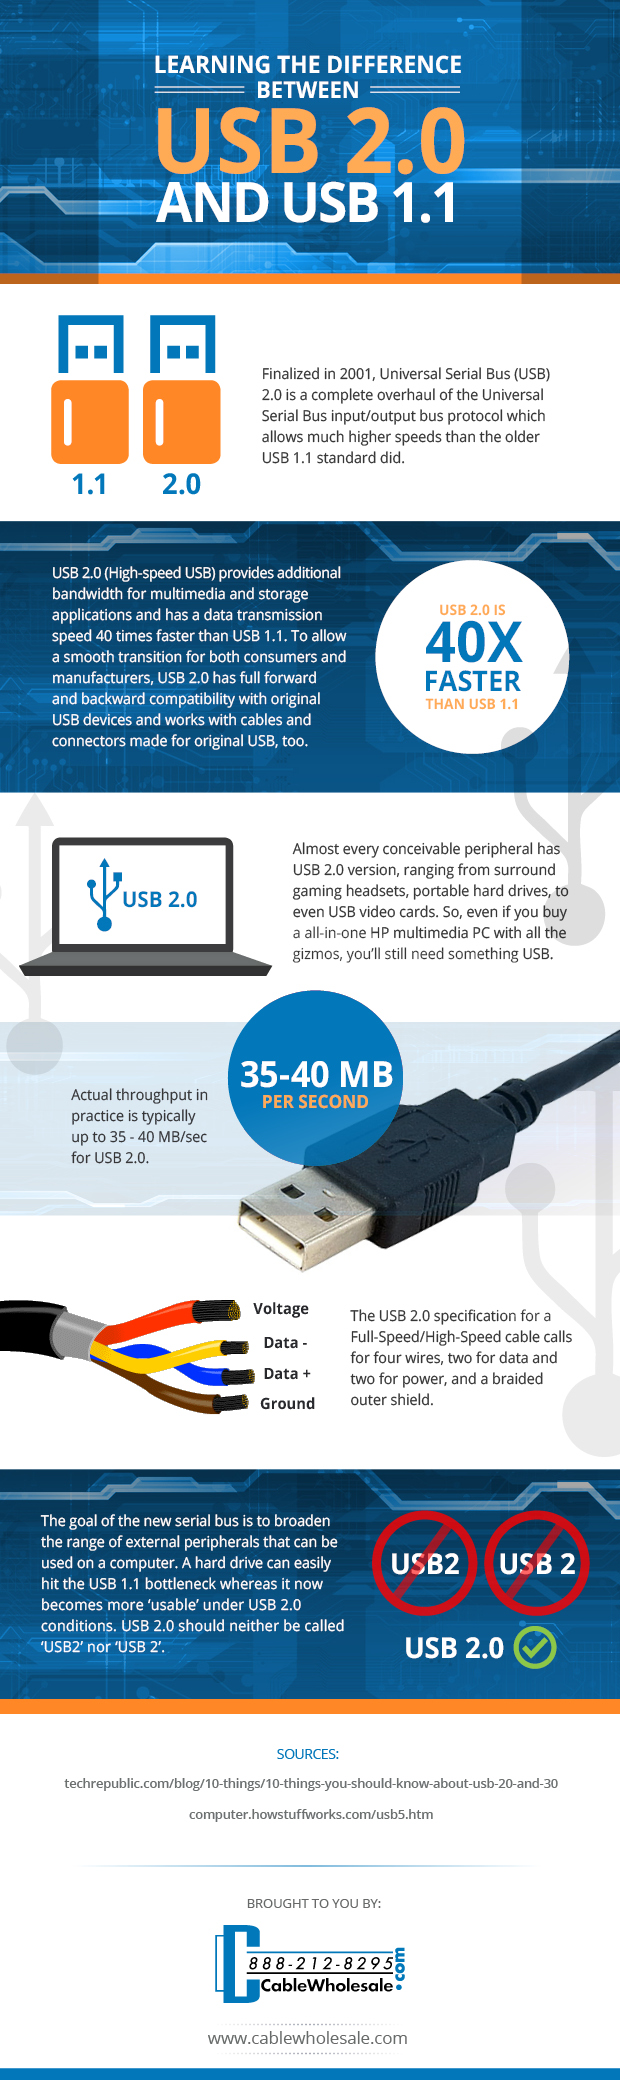 Learning the Difference Between USB 2.0 and USB 1.1